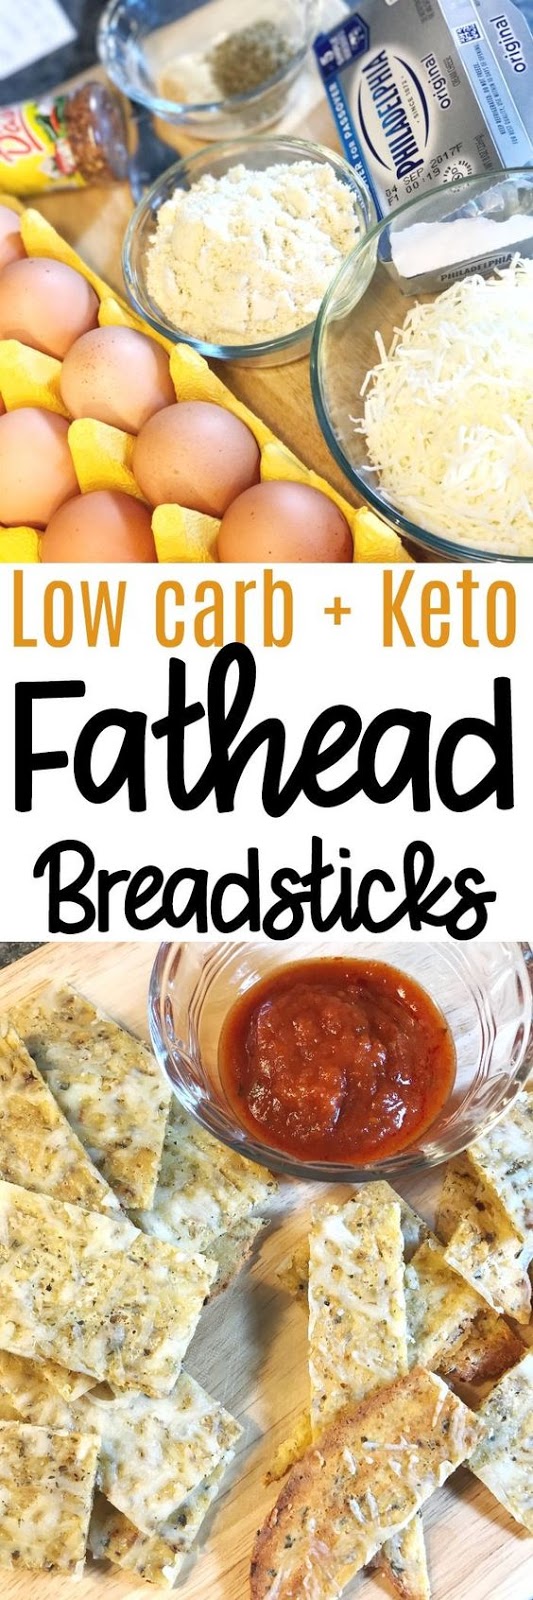 Low Carb and Keto Fathead Cheese Sticks